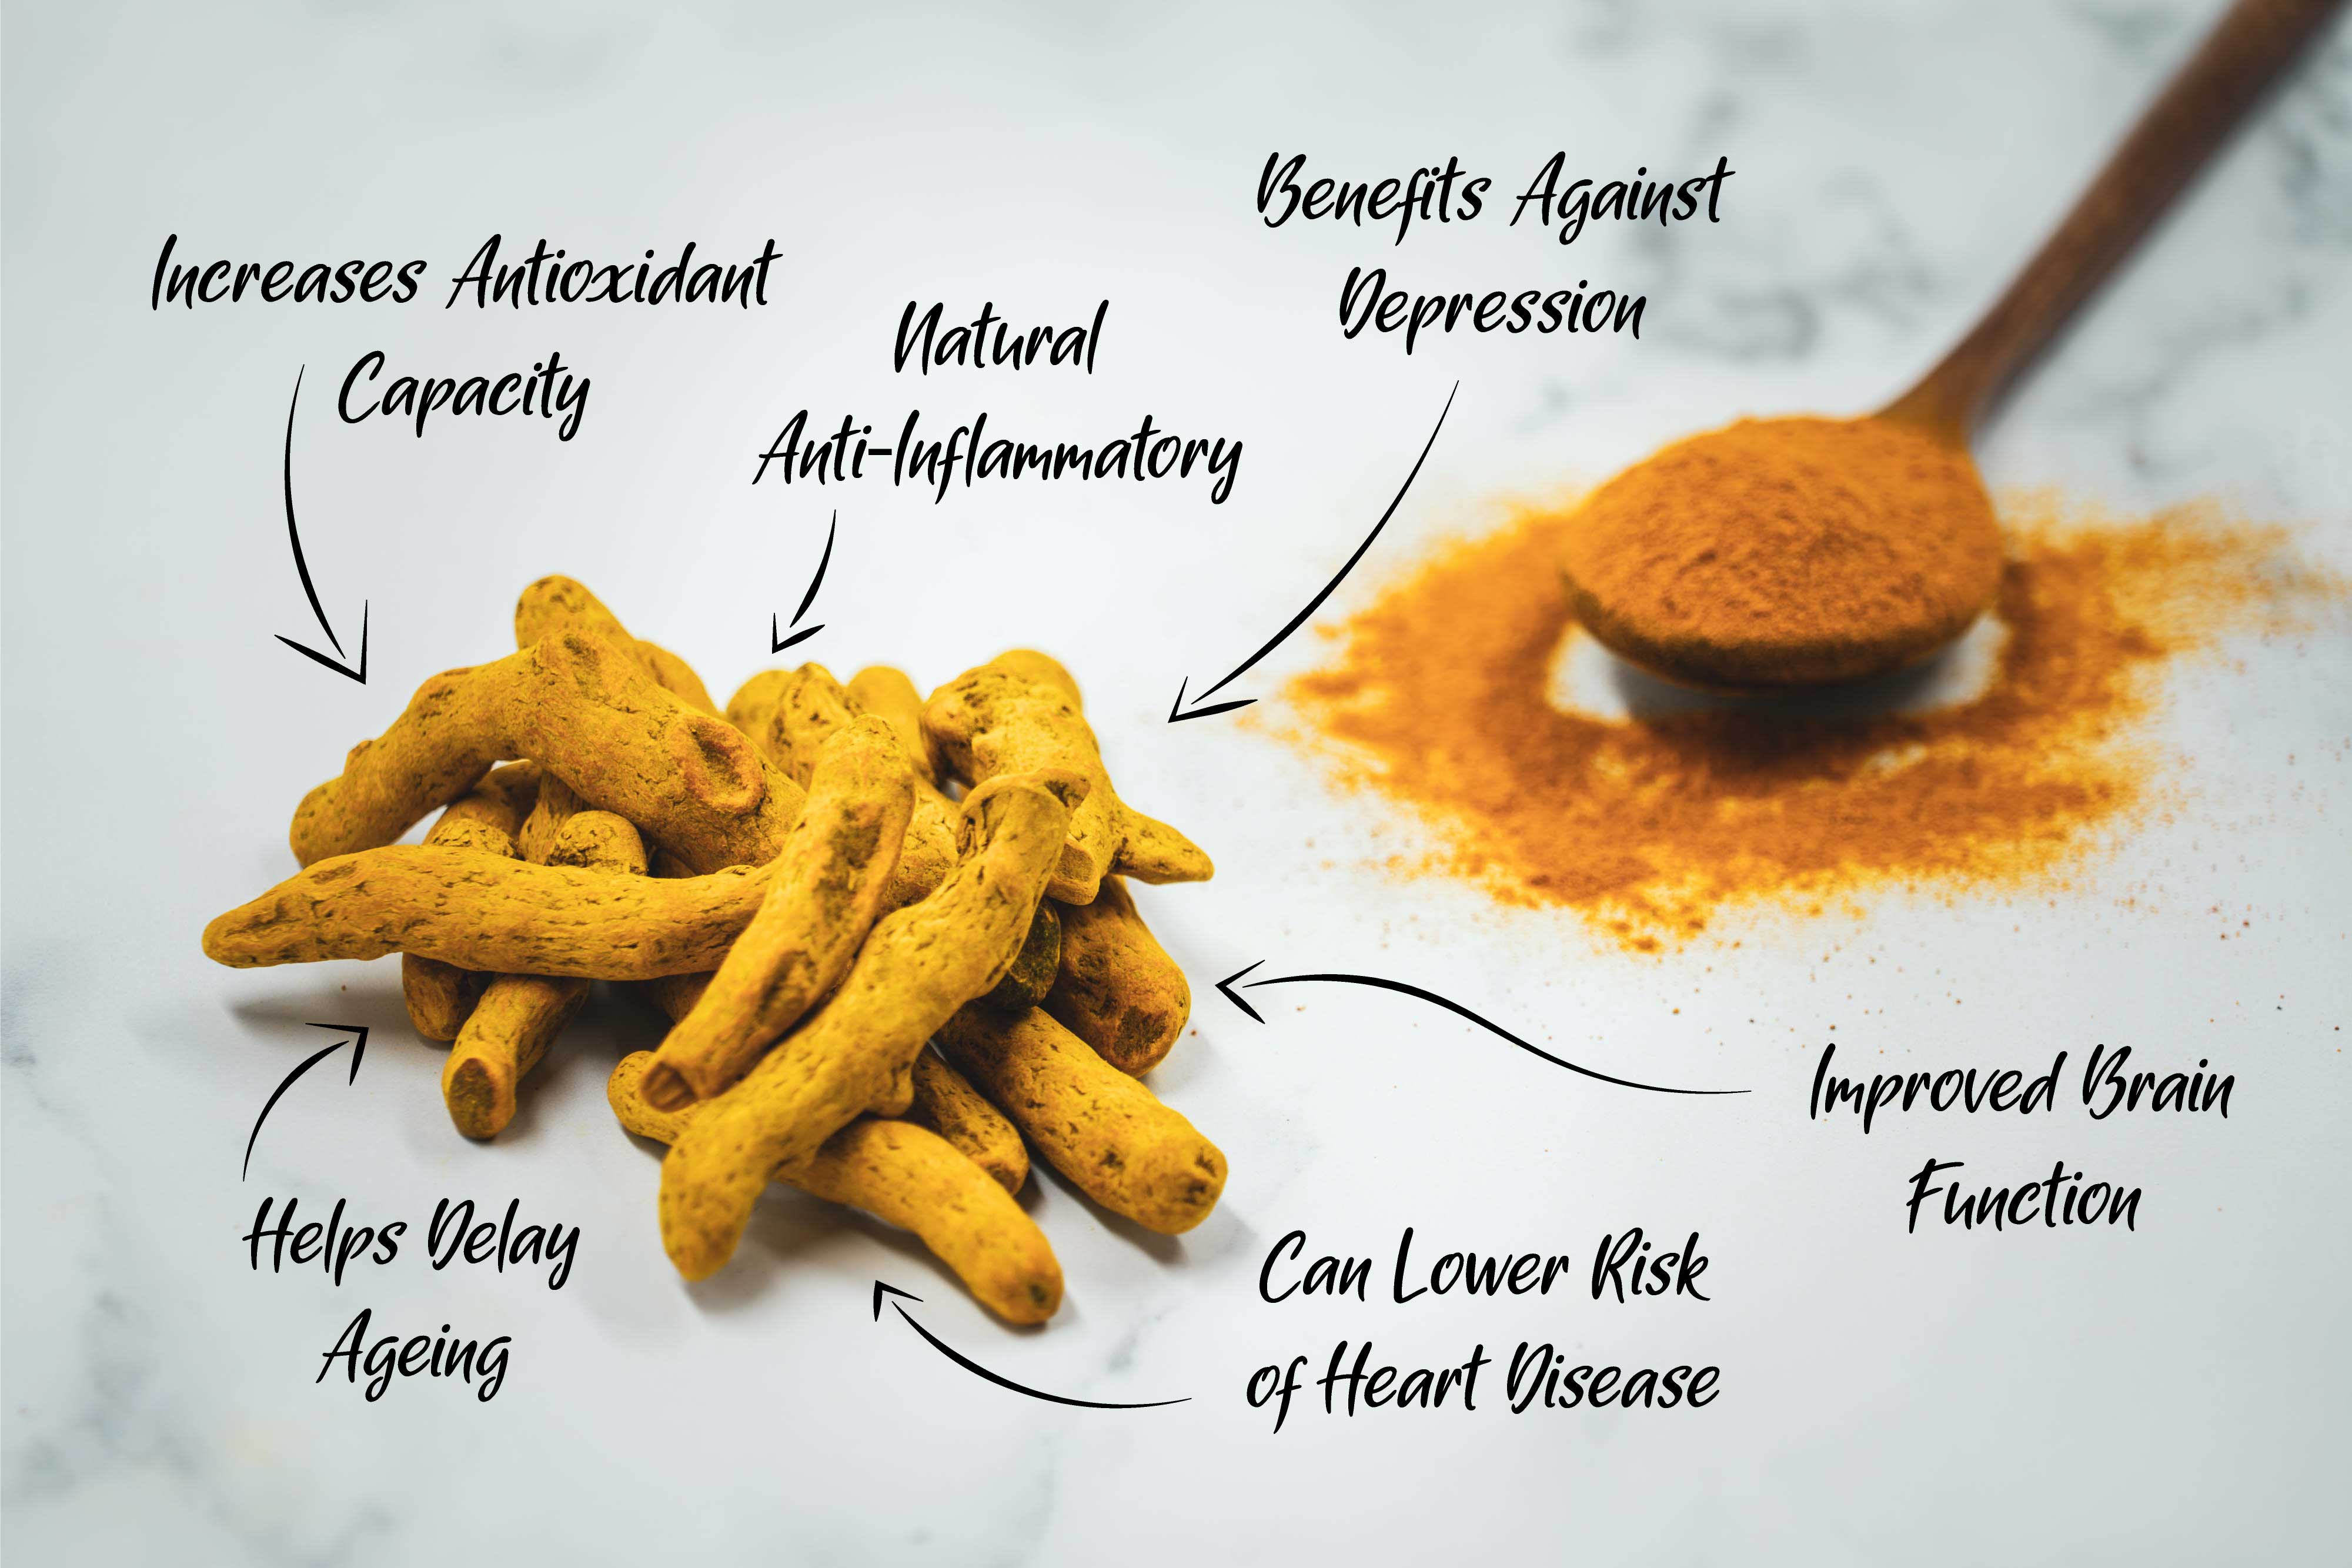 5. Cancer Prevention and Treatment: Examining Curcumin's Promising Role in Oncology